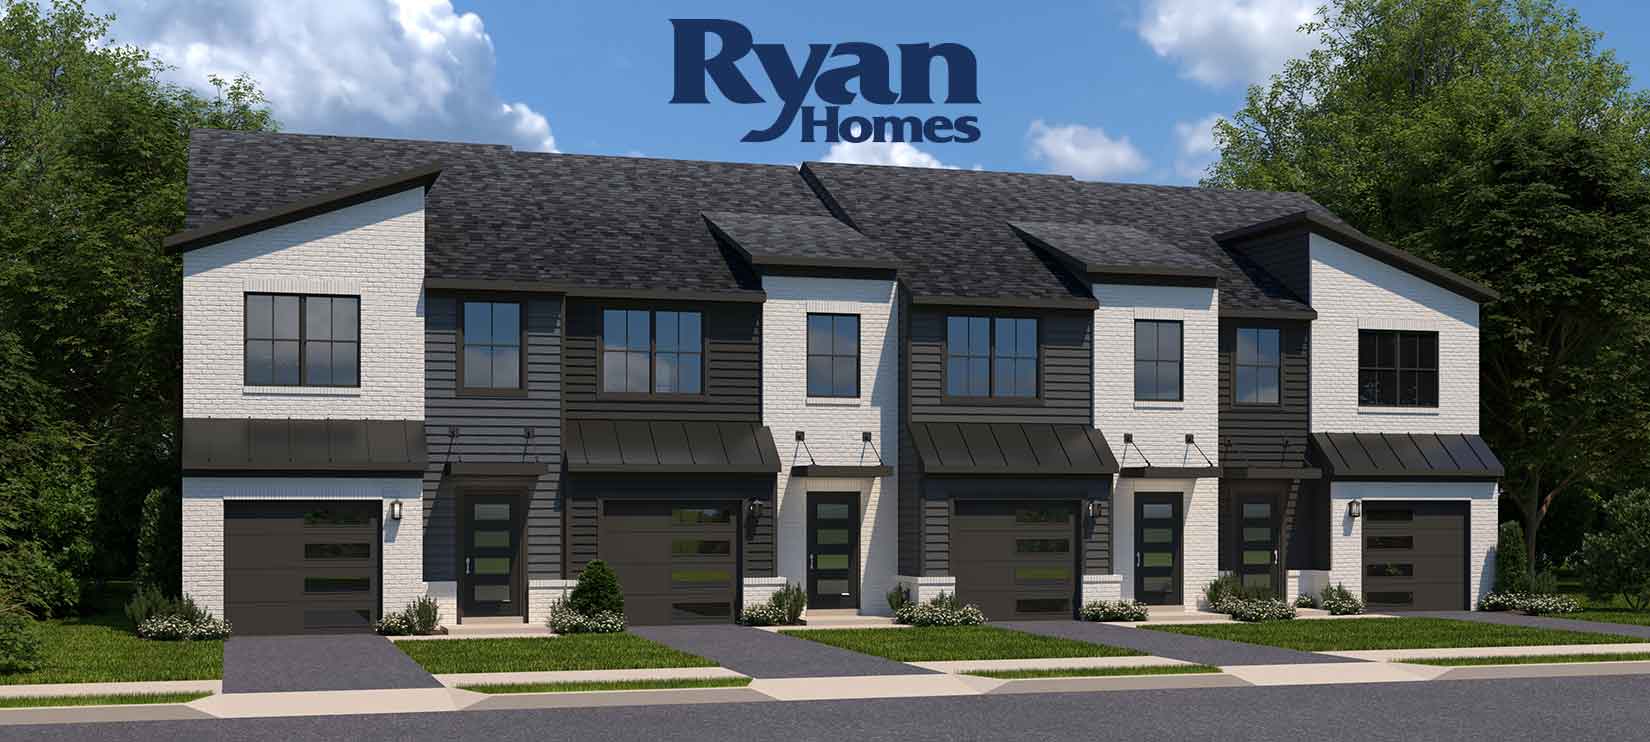 Ryan Homes Coming to Nexus Master Planned Community Gallatin Tennessee